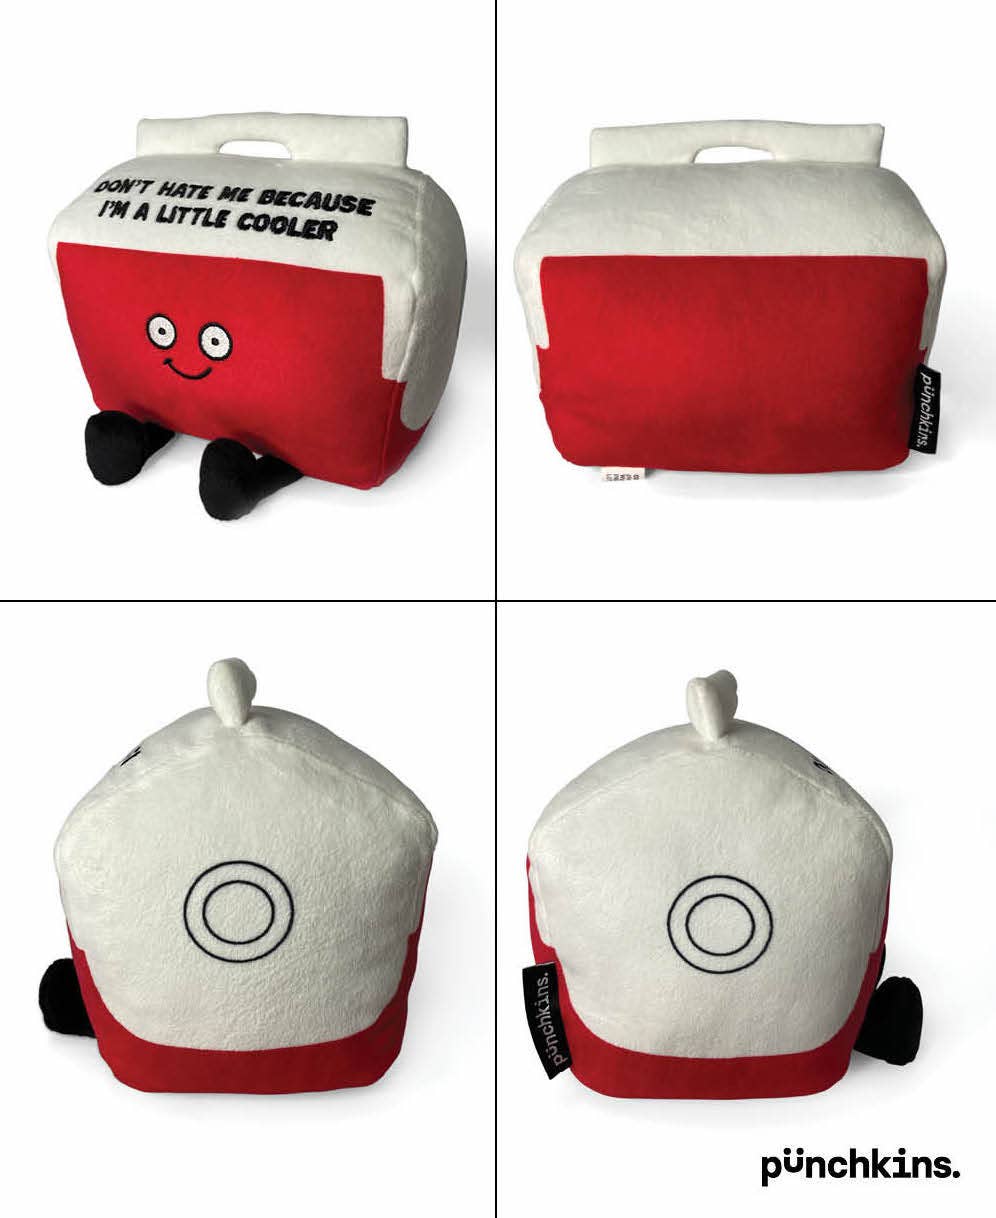 "Don't Hate Me Because I'm A Little Cooler", Funny Cooler Plushie